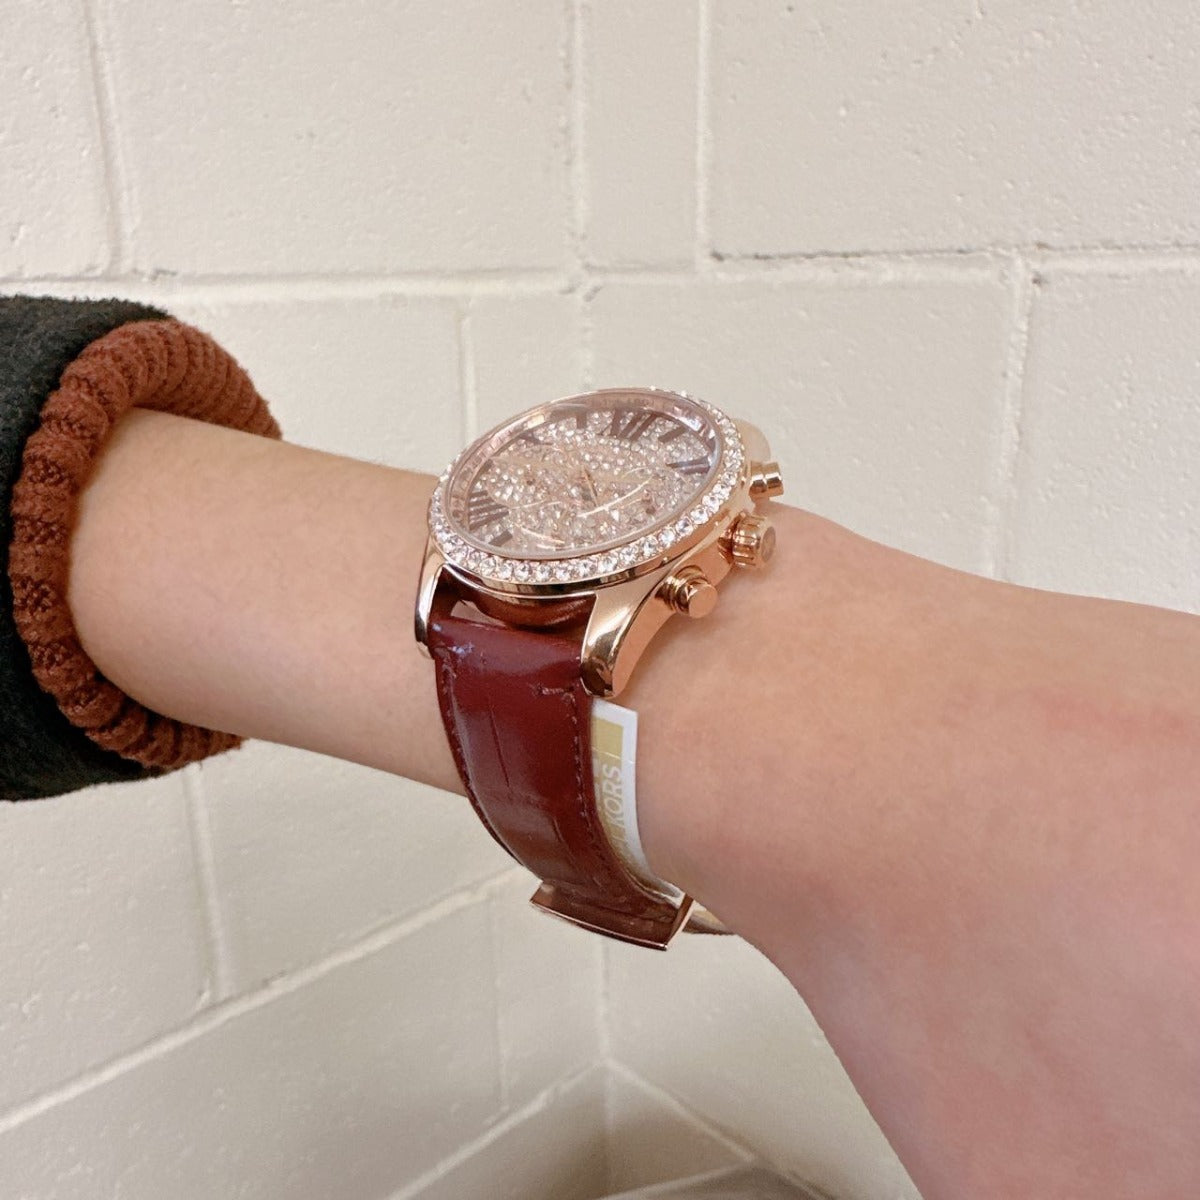 Michael Kors MK2971 Lexington Pave Rose Gold Tone and Crocodile Embossed Leather Watch - 796483577282